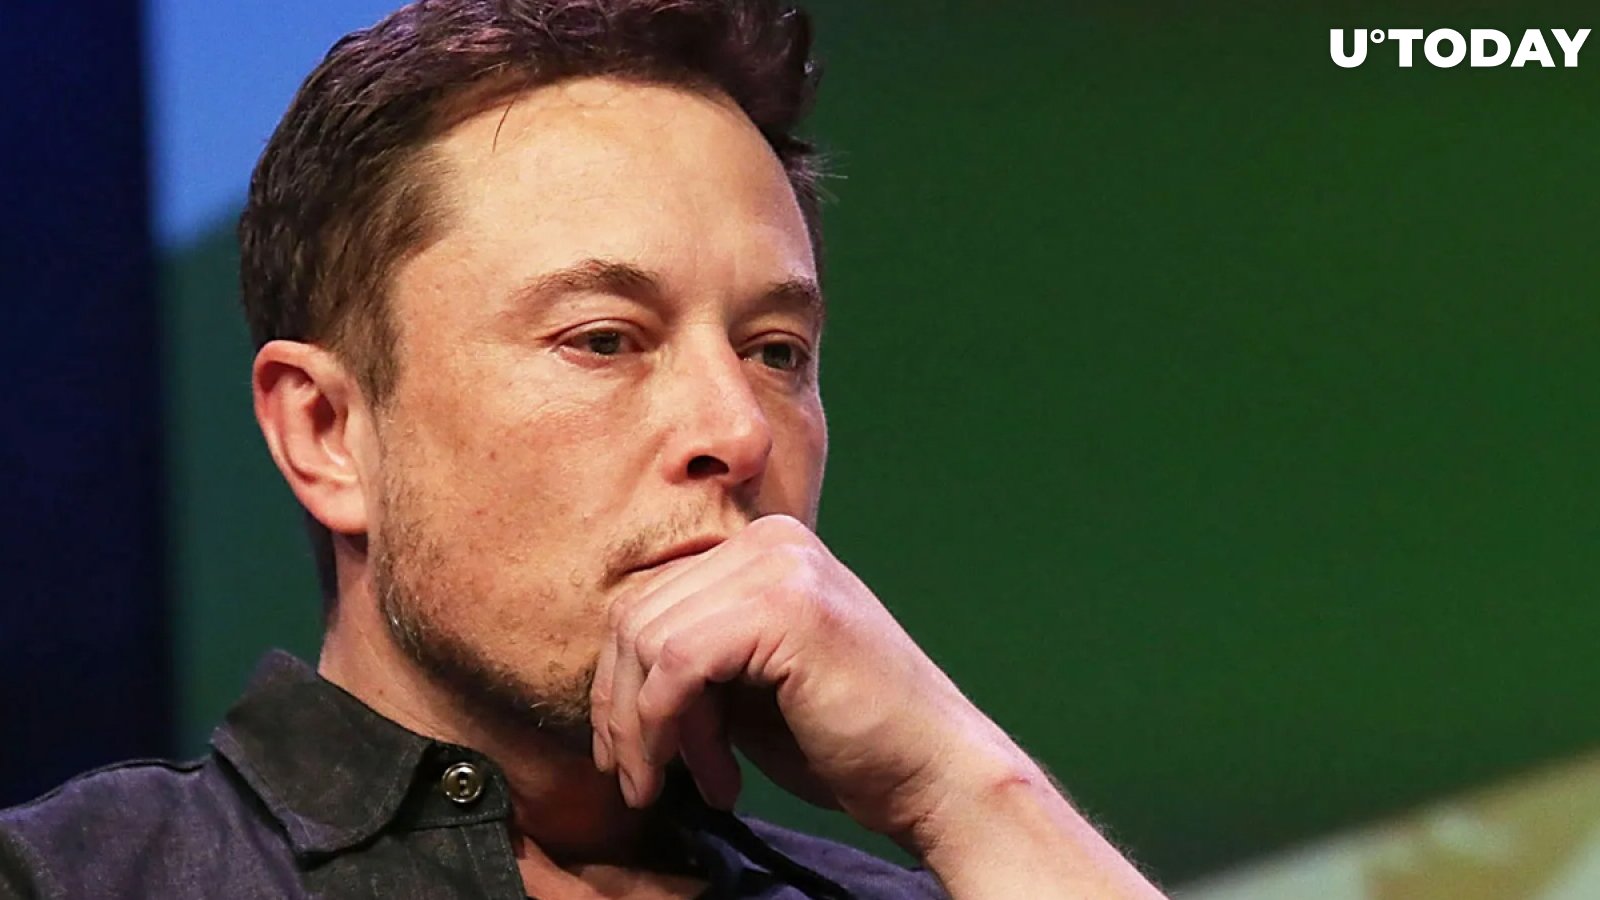 Elon Musk No Longer World's Second-Richest Person as His Fortune Sees Sharp Drop